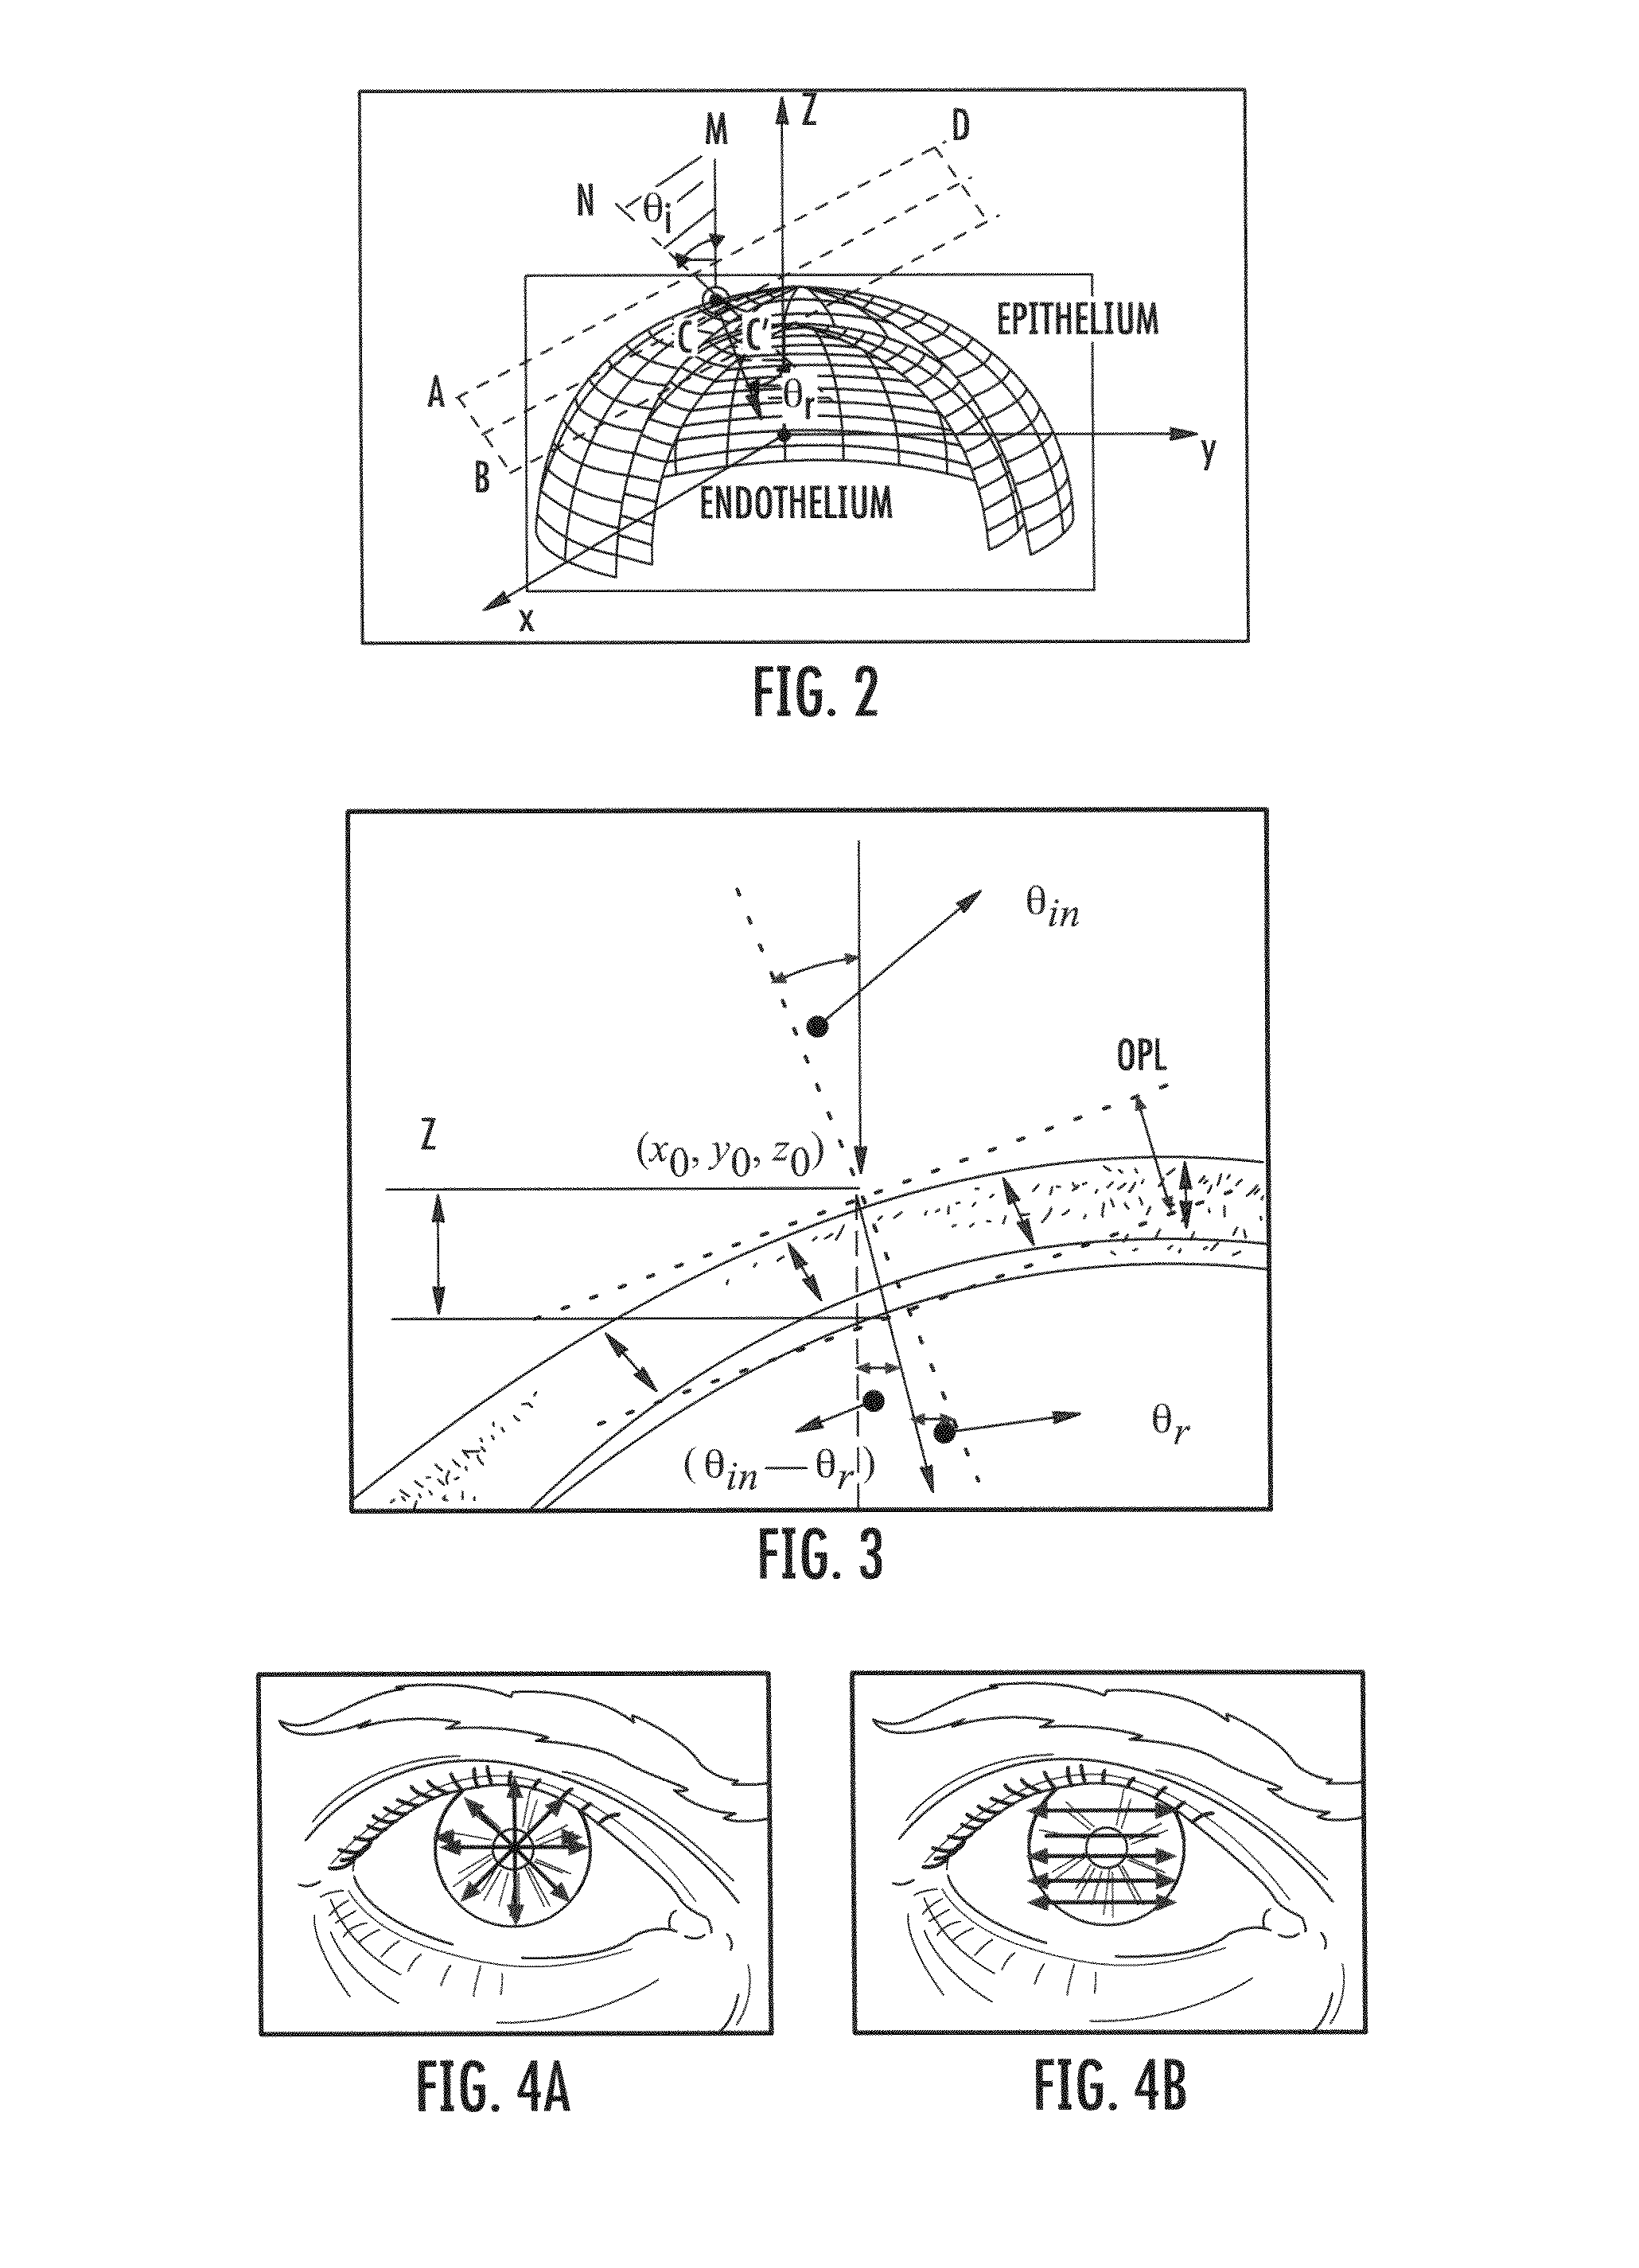 Methods and computer program products for quantitative three-dimensional image correction and clinical parameter computation in optical coherence tomography